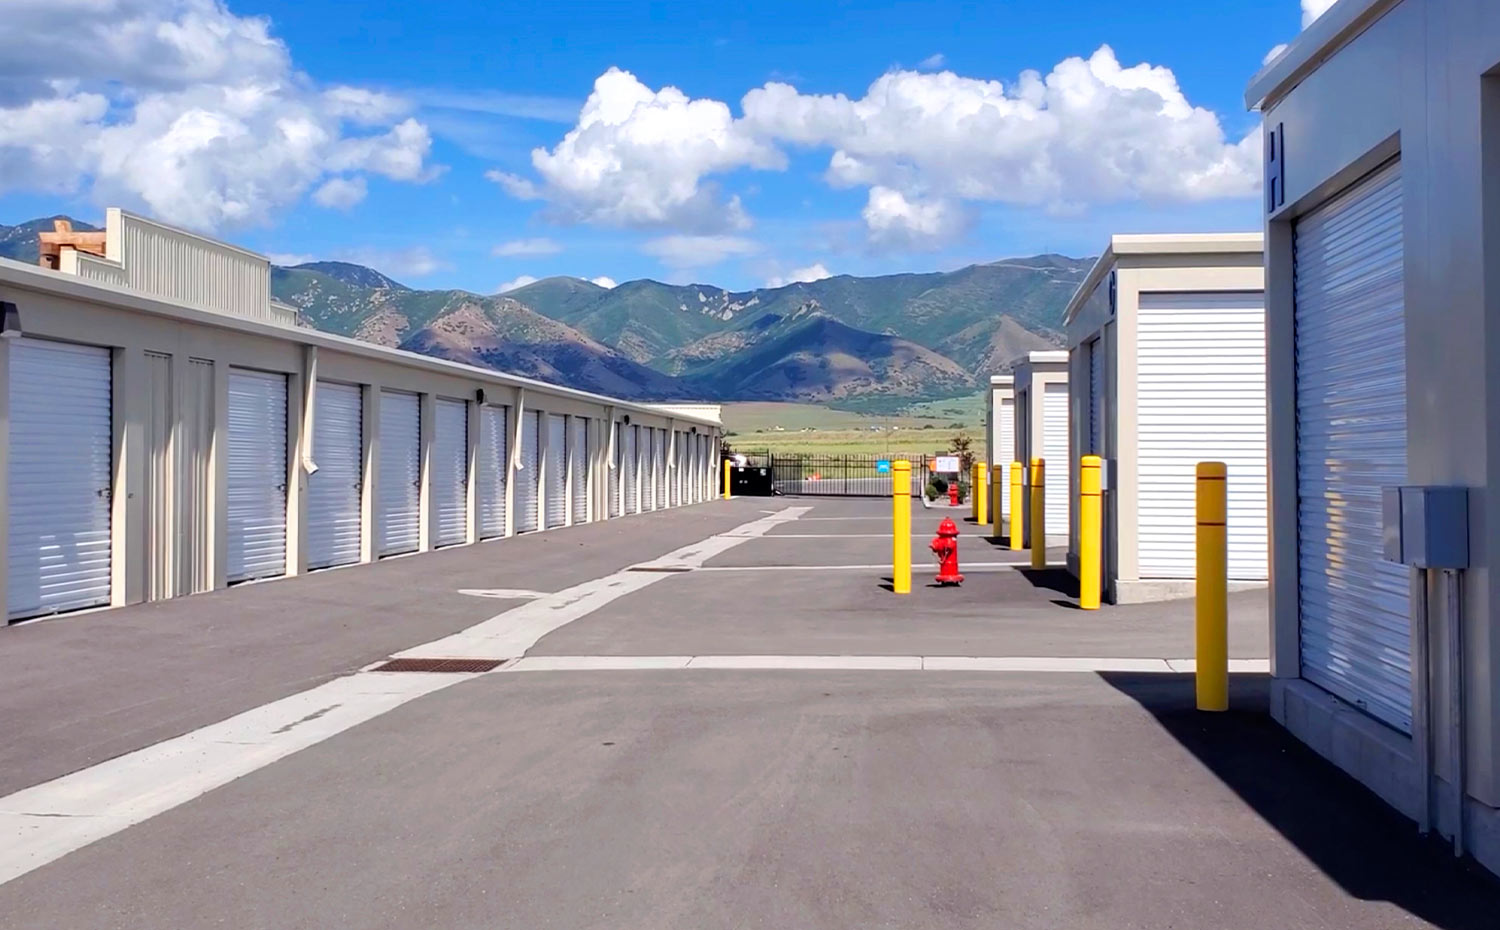 view down a storage block alley way, including a view of the Utah mountains beyond the StoreEase facility